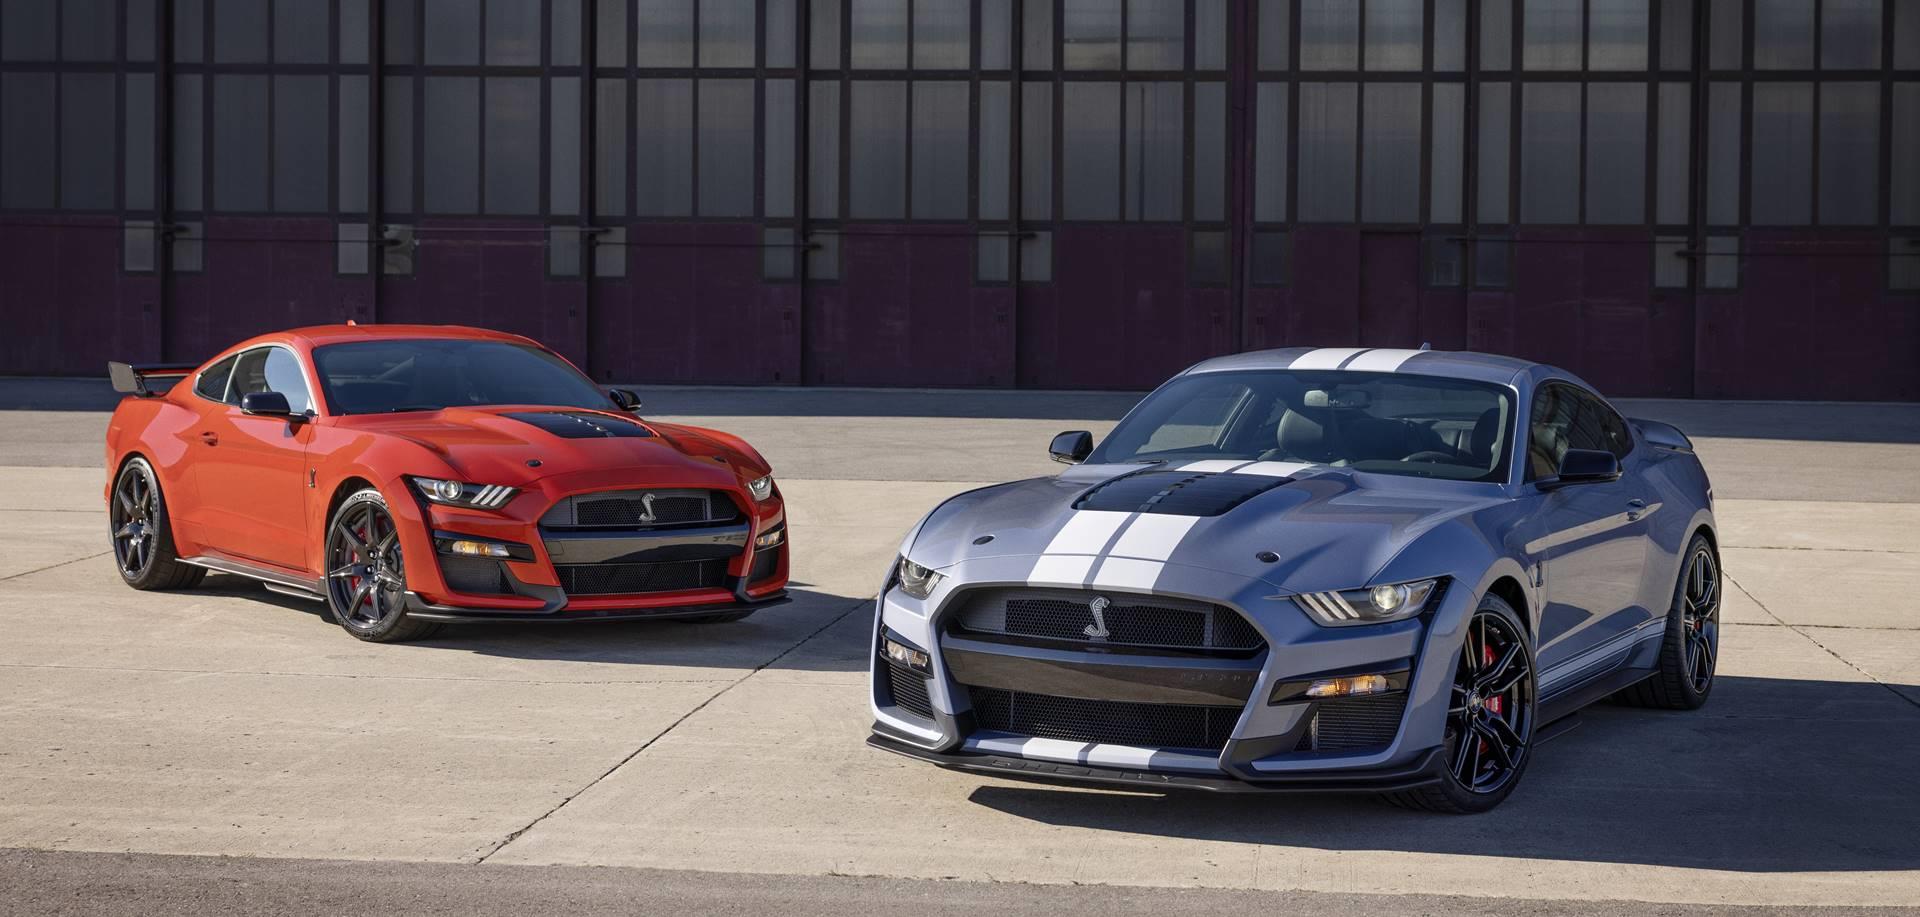 2022 Ford Mustang Shelby GT500 Heritage Edition News and Information